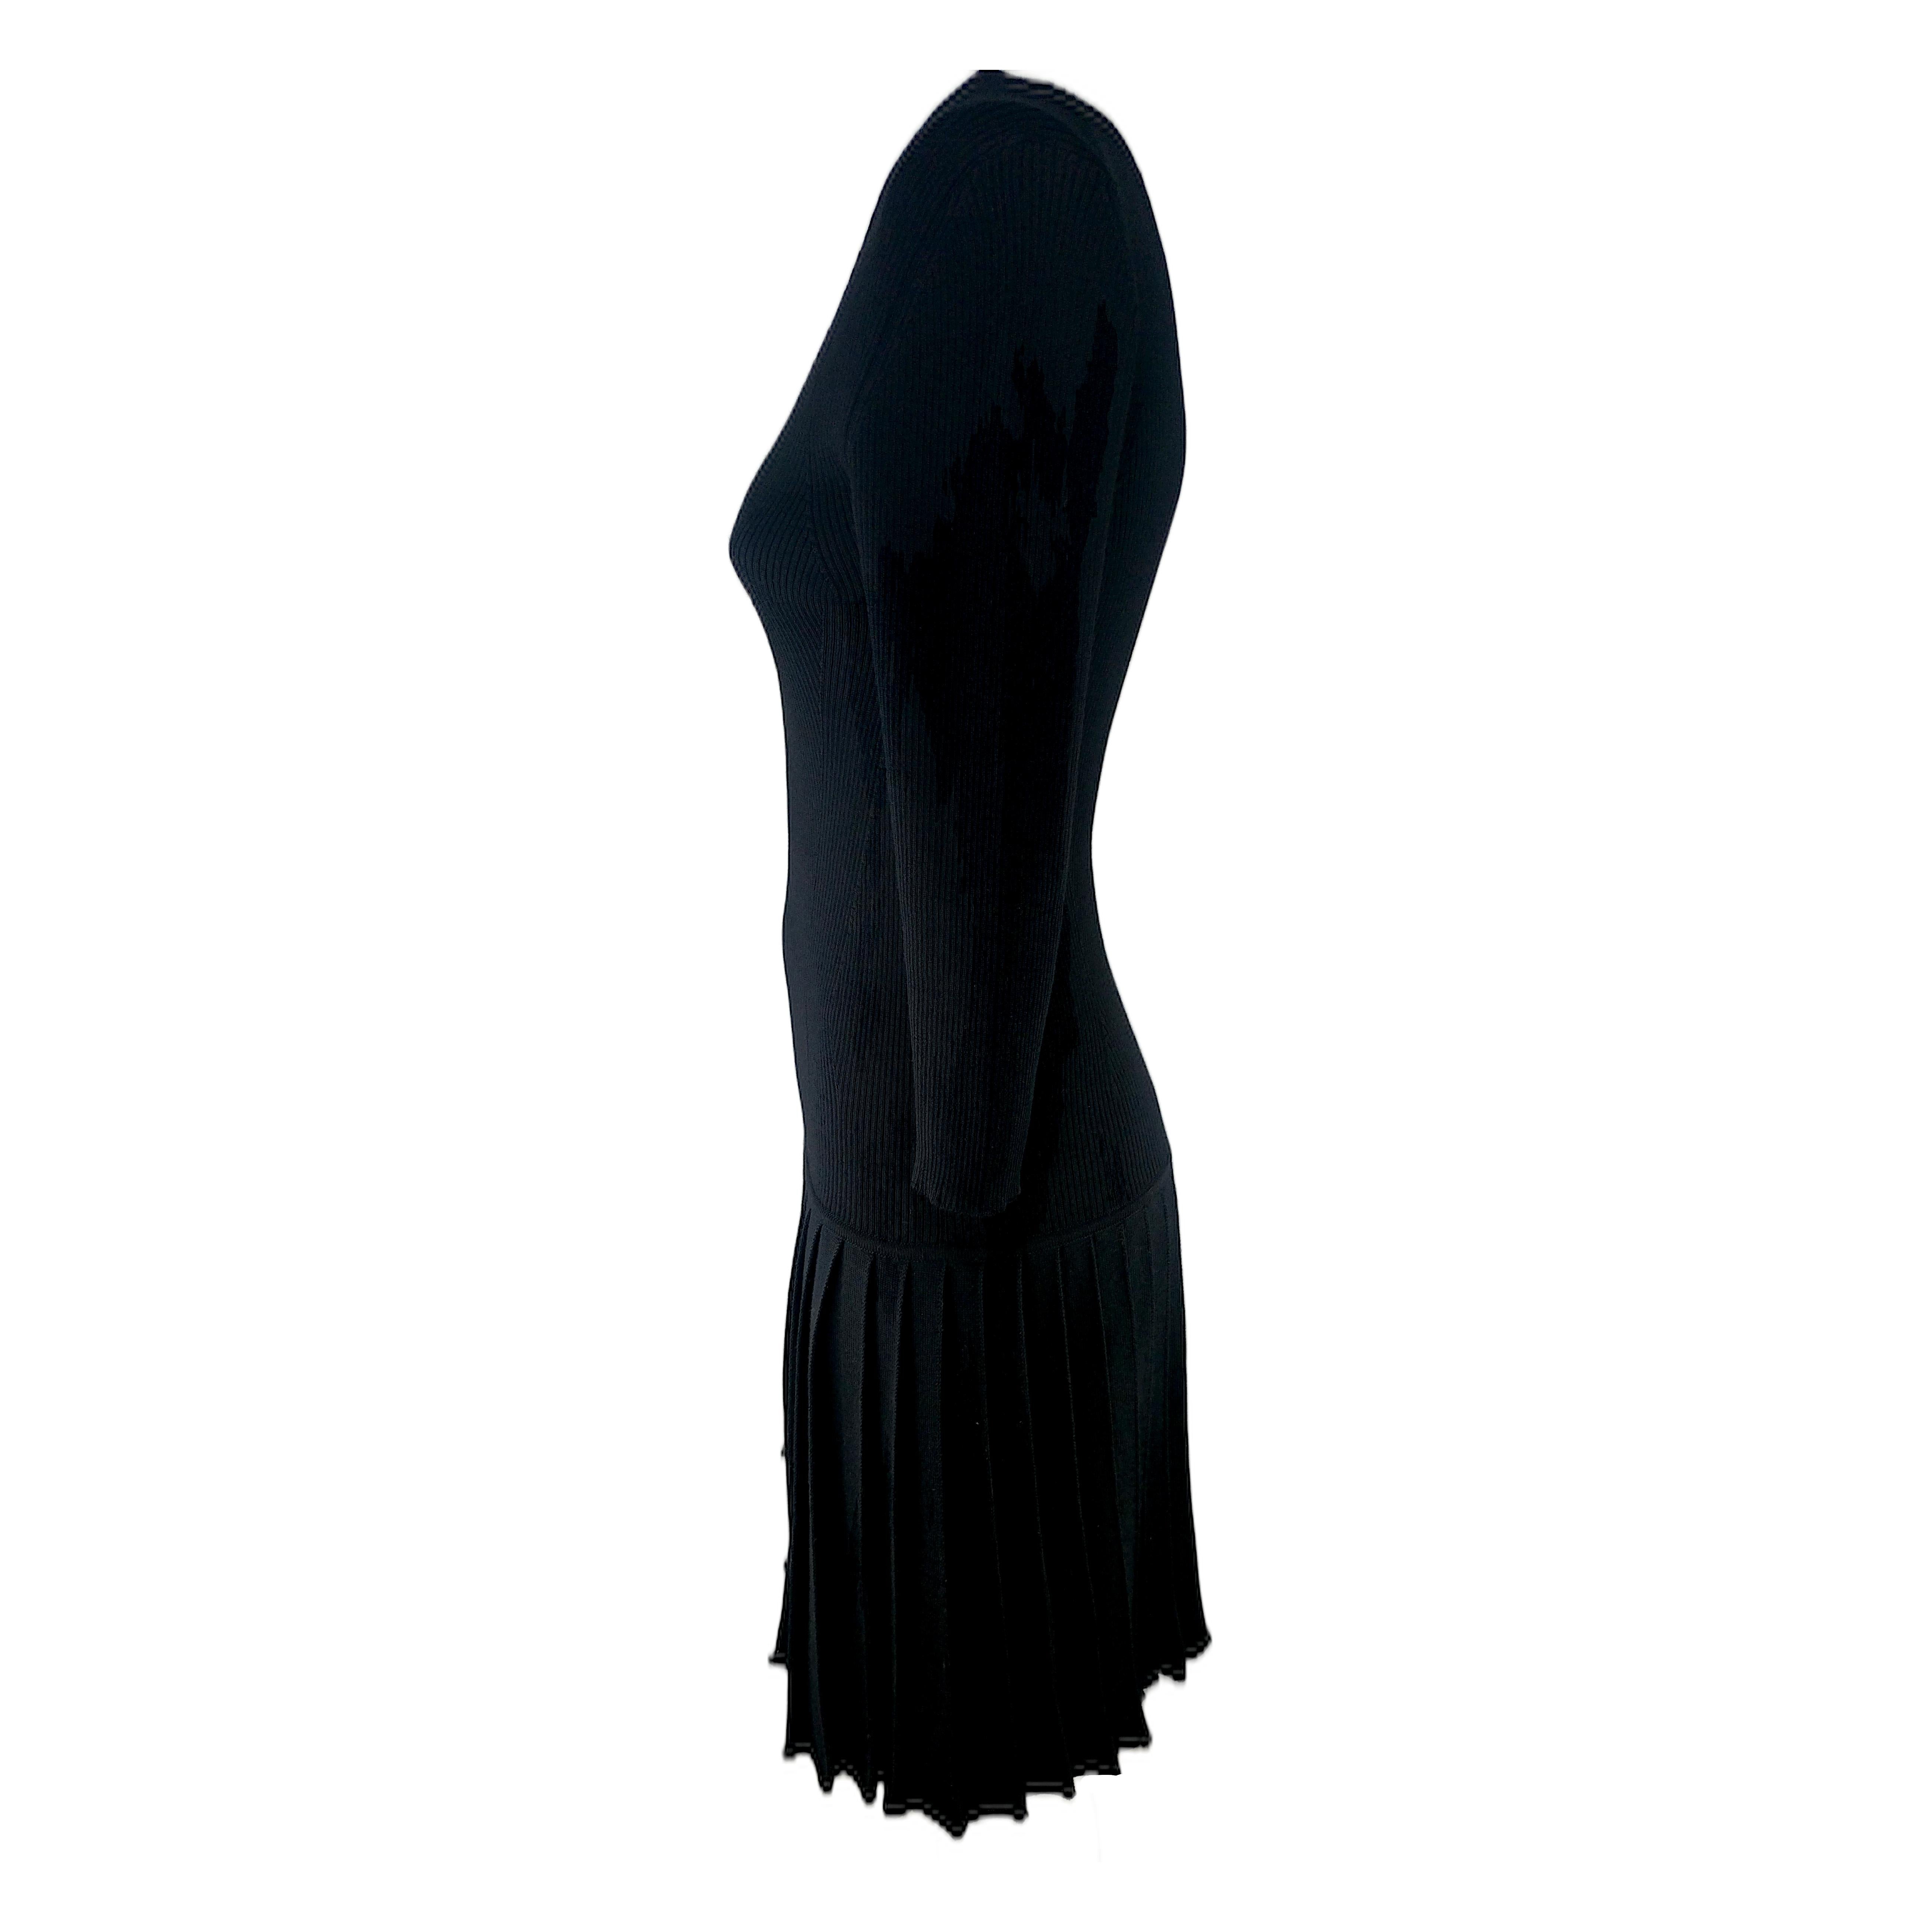 This genuine dress by Prada features a V-neckline, Three-Quarter sleeves and a pleated skirt. It is made of pure wool yarn and knitted in a way that makes it very stretch, thus accommodating various sizes. It's a very versatile item that you will